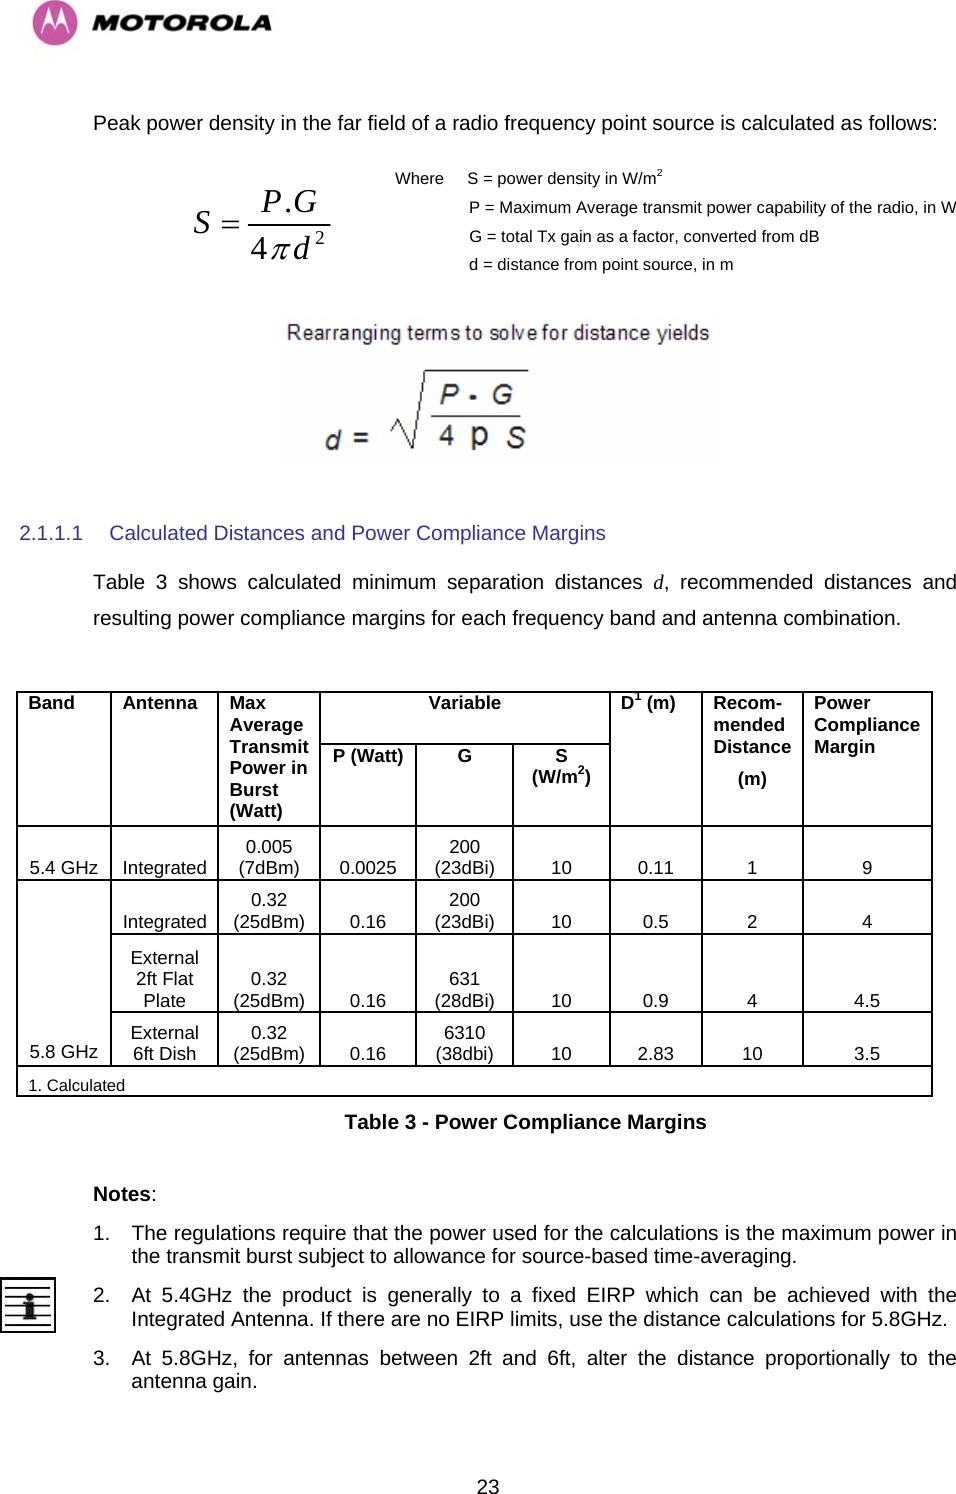   23Peak power density in the far field of a radio frequency point source is calculated as follows:  Where     S = power density in W/m2                 P = Maximum Average transmit power capability of the radio, in W                  G = total Tx gain as a factor, converted from dB                  d = distance from point source, in m  24.dGPSπ=     2.1.1.1  Calculated Distances and Power Compliance Margins Table 3 shows calculated minimum separation distances d, recommended distances and resulting power compliance margins for each frequency band and antenna combination.  Variable Band Antenna Max Average Transmit Power in Burst (Watt) P (Watt)  G  S (W/m2) D1 (m)  Recom- mended Distance (m) Power Compliance Margin 5.4 GHz  Integrated  0.005 (7dBm)  0.0025  200 (23dBi)  10 0.11  1  9 Integrated  0.32 (25dBm) 0.16  200 (23dBi) 10  0.5  2  4 External 2ft Flat Plate  0.32 (25dBm) 0.16  631 (28dBi) 10  0.9  4  4.5 5.8 GHz  External 6ft Dish  0.32 (25dBm) 0.16  6310 (38dbi) 10  2.83  10  3.5 1. Calculated Table 3 - Power Compliance Margins  Notes: 1.  The regulations require that the power used for the calculations is the maximum power in the transmit burst subject to allowance for source-based time-averaging.  2.  At 5.4GHz the product is generally to a fixed EIRP which can be achieved with the Integrated Antenna. If there are no EIRP limits, use the distance calculations for 5.8GHz. 3.  At 5.8GHz, for antennas between 2ft and 6ft, alter the distance proportionally to the antenna gain.  